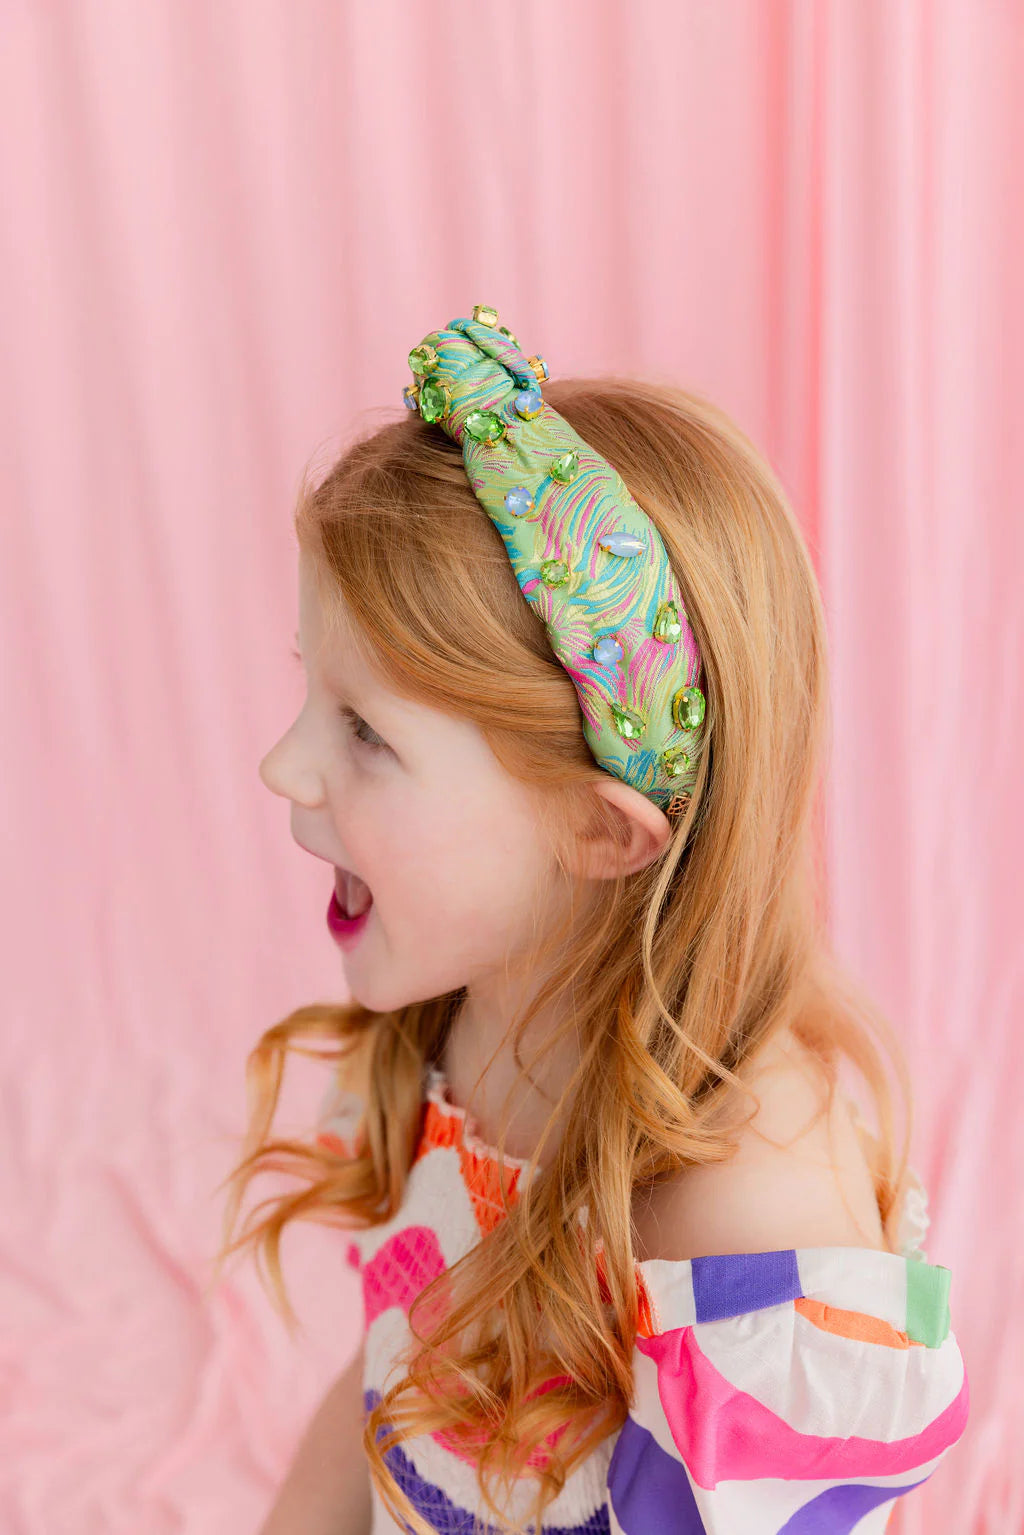 BRIANNA CANNON CHILD SIZE BRIGHT GREEN BROCADE HEADBAND WITH PINK AND BLUE